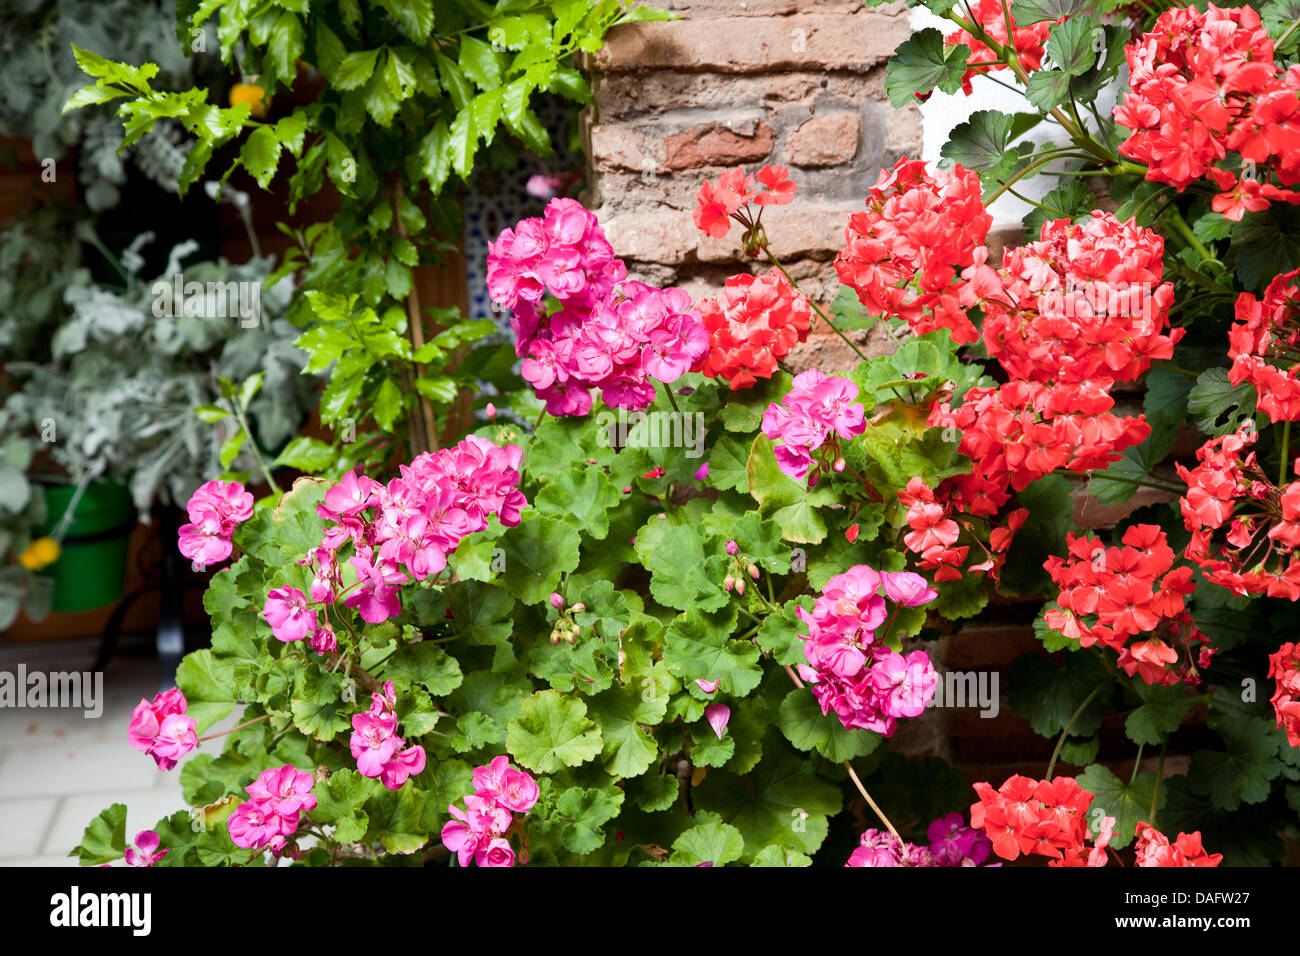 JOY AND COLOR IN ANDALUSIA Stock Photo